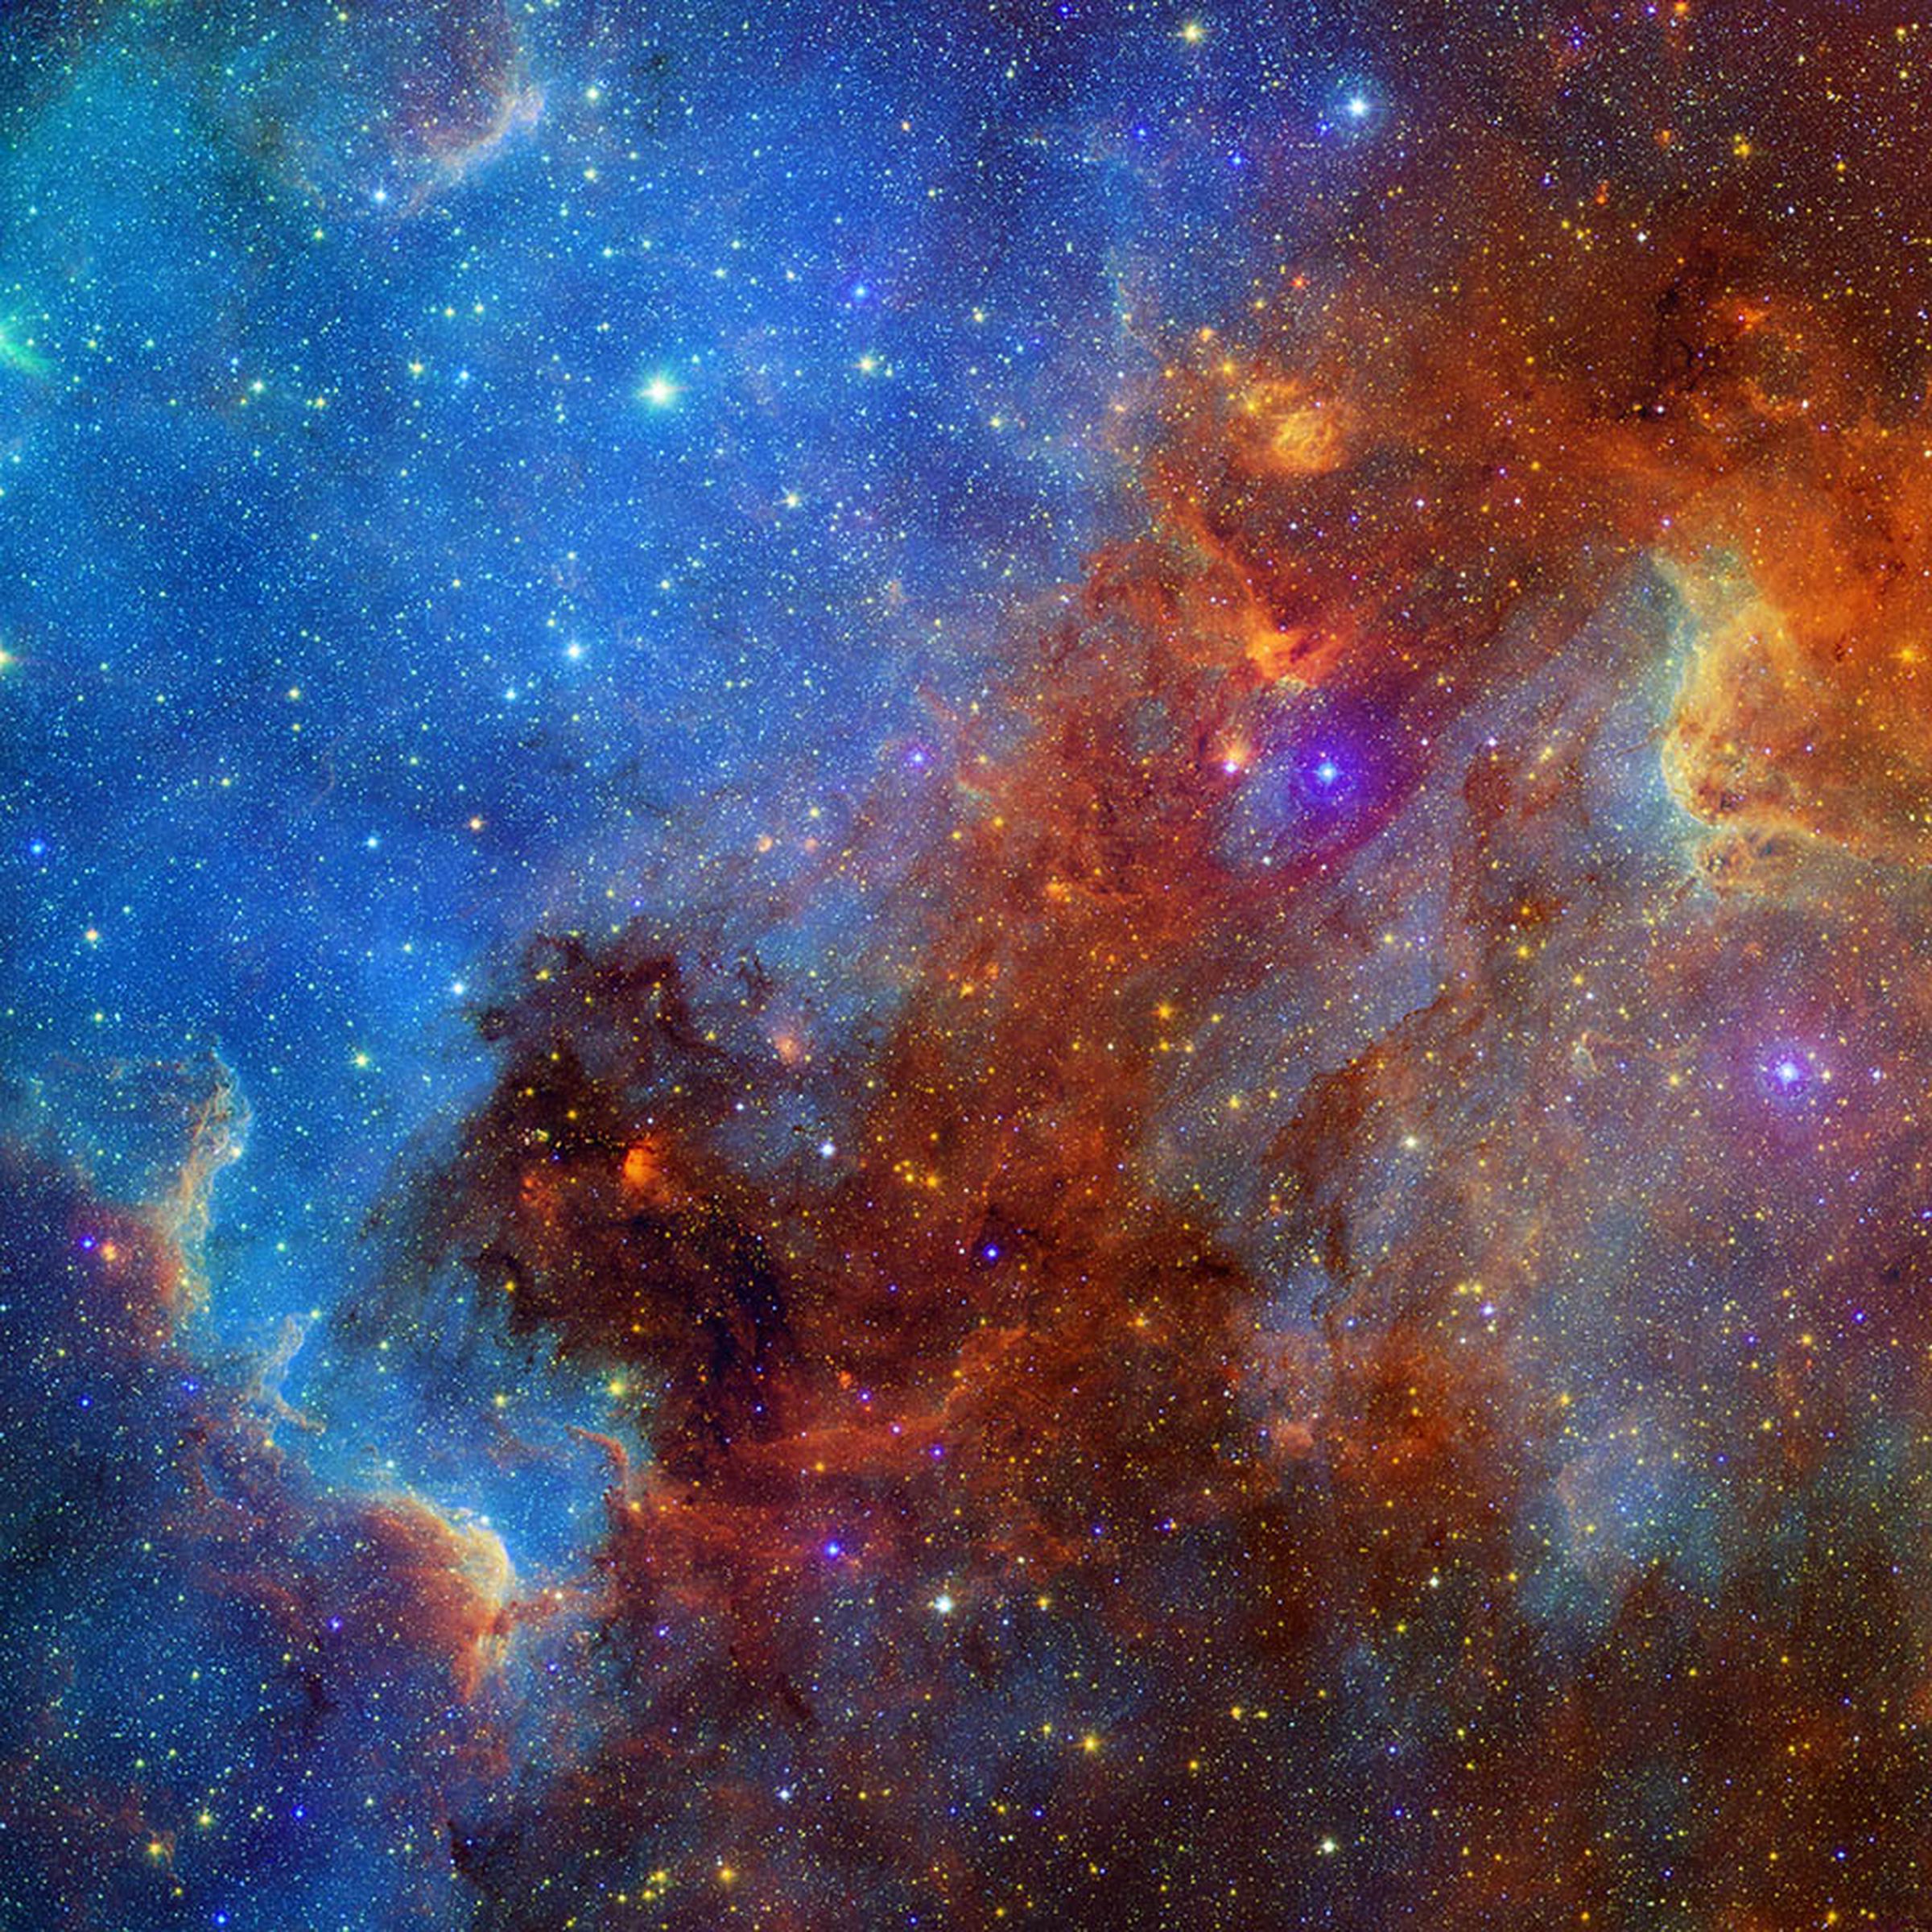 The North America Nebula seen in visible and infrared light taken from Spitzer